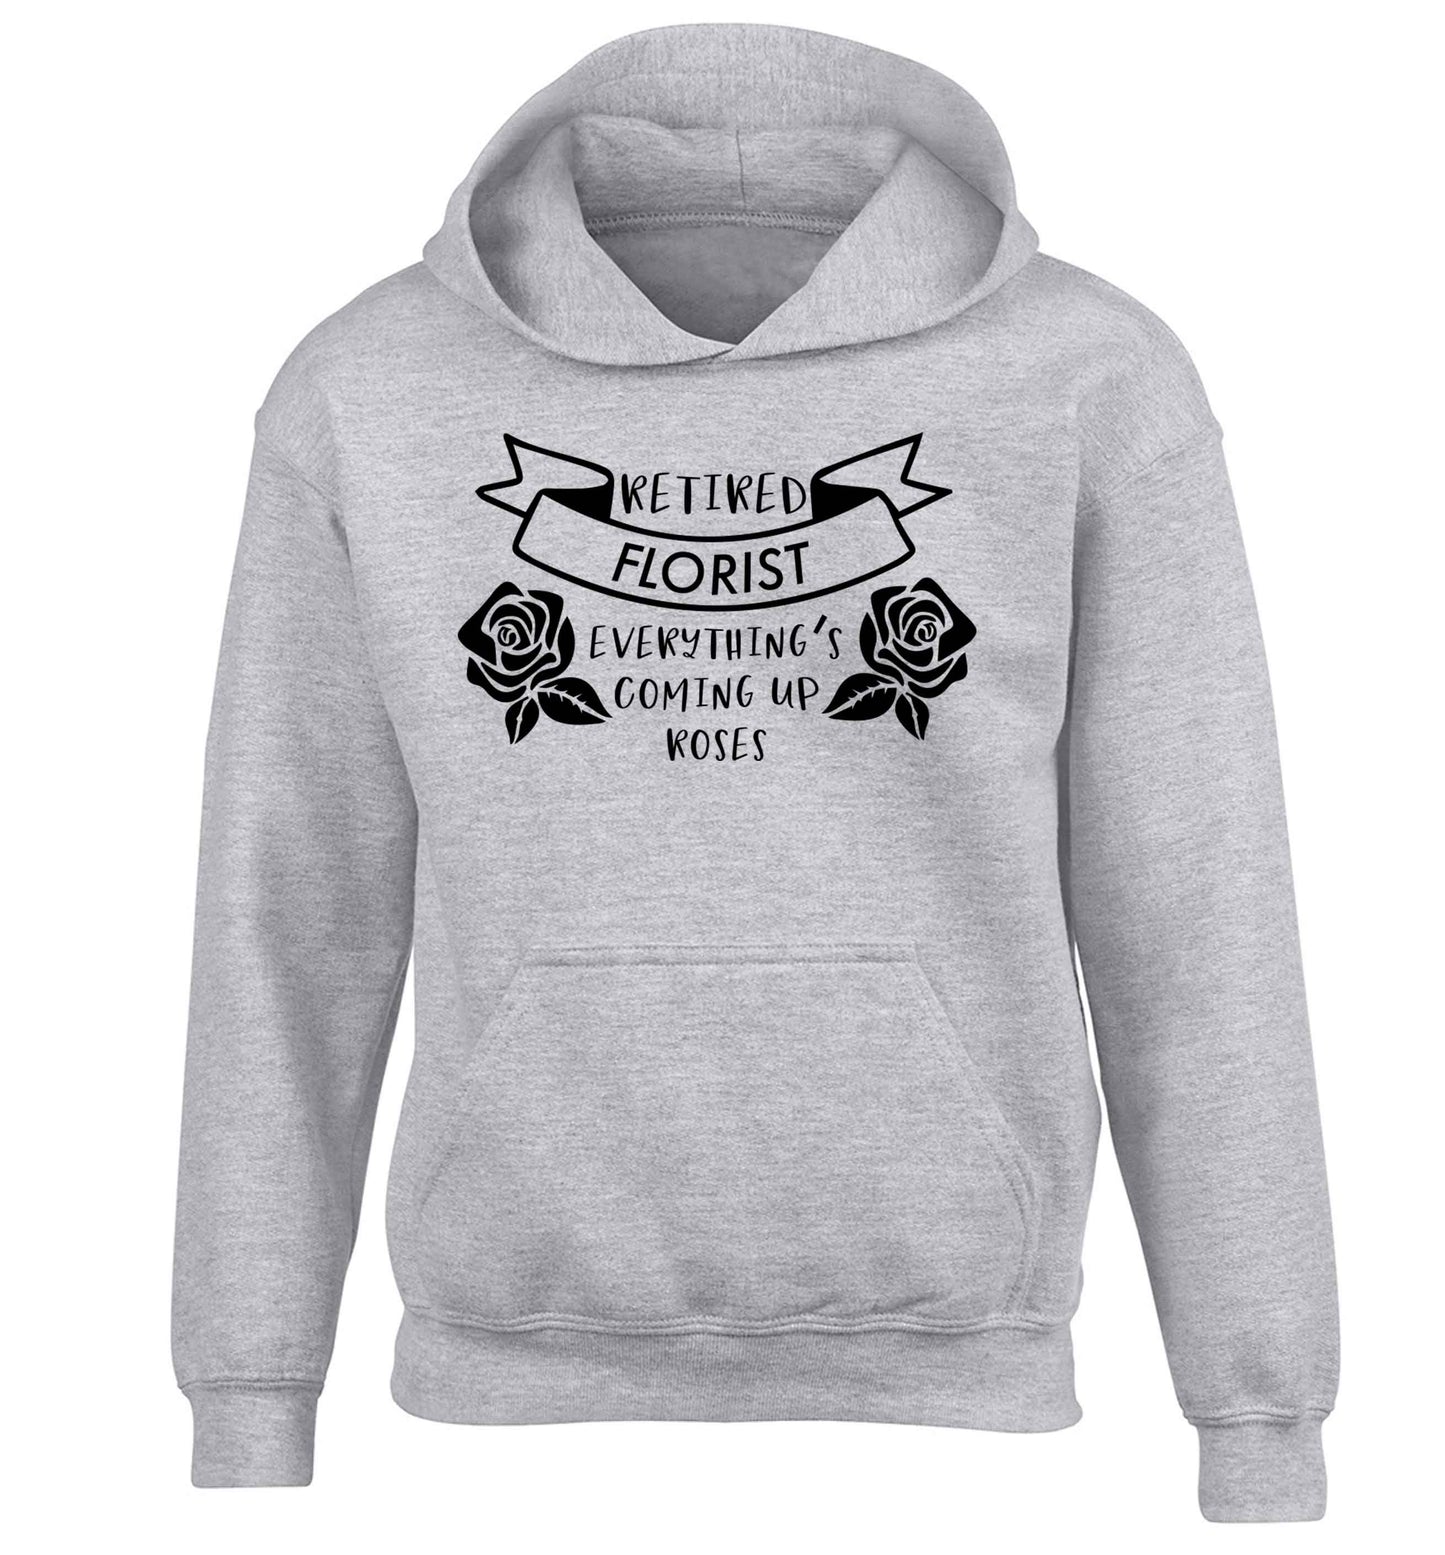 Retired florist everything's coming up roses children's grey hoodie 12-13 Years